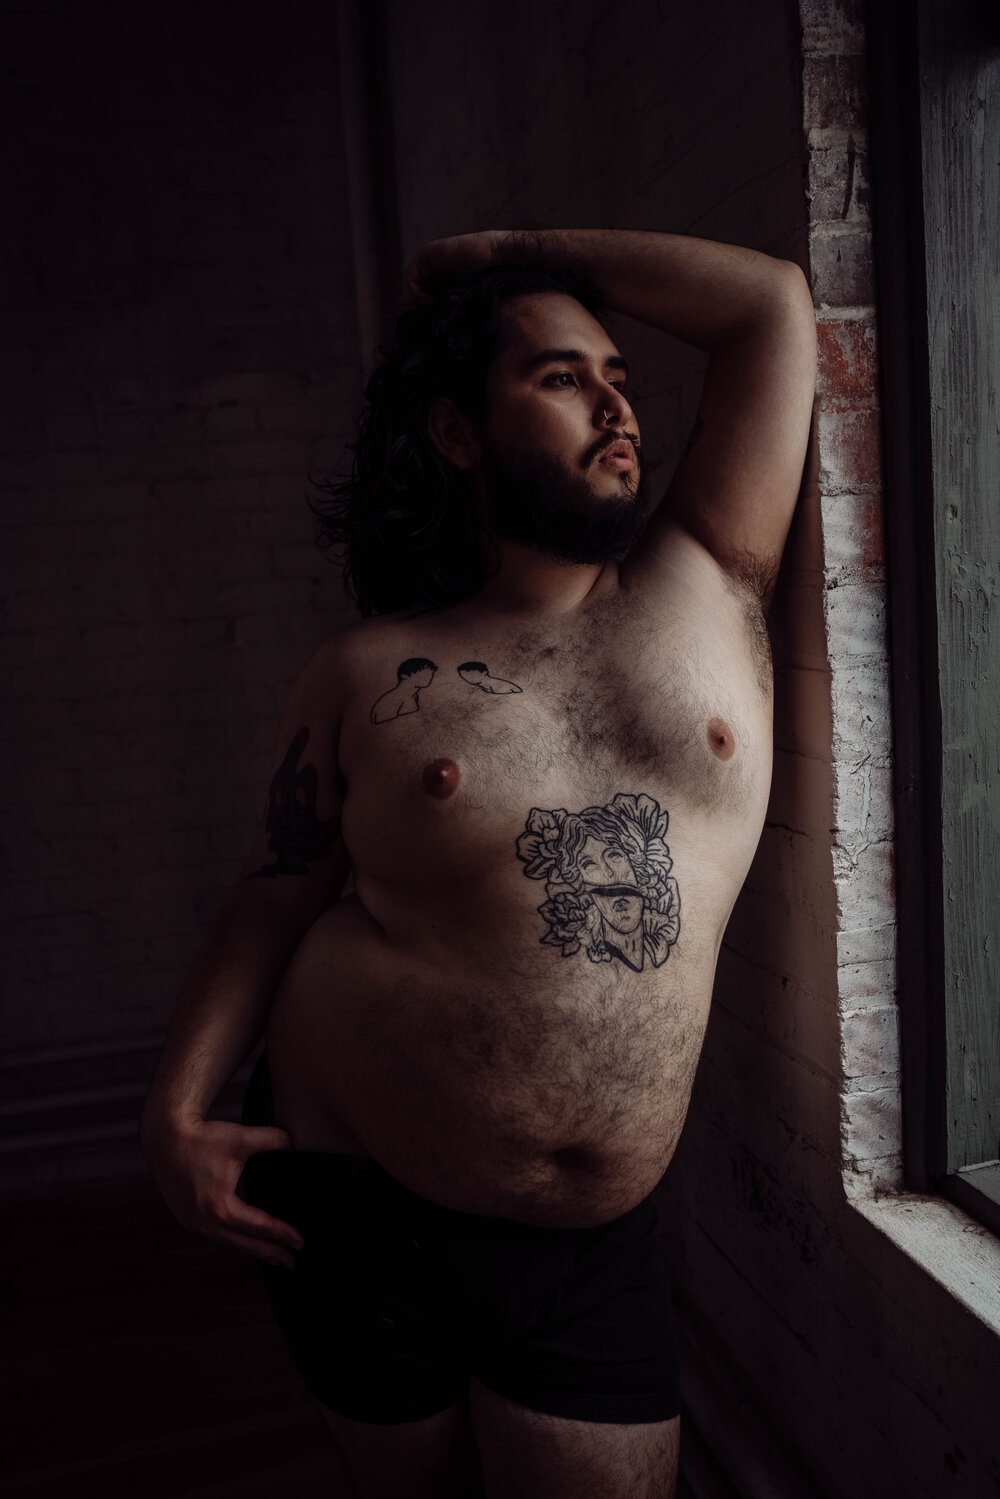 Oklahoma City Boudoir Photographer for Men bearded shirtless man with tattoos leaning against brick wall looking out the window